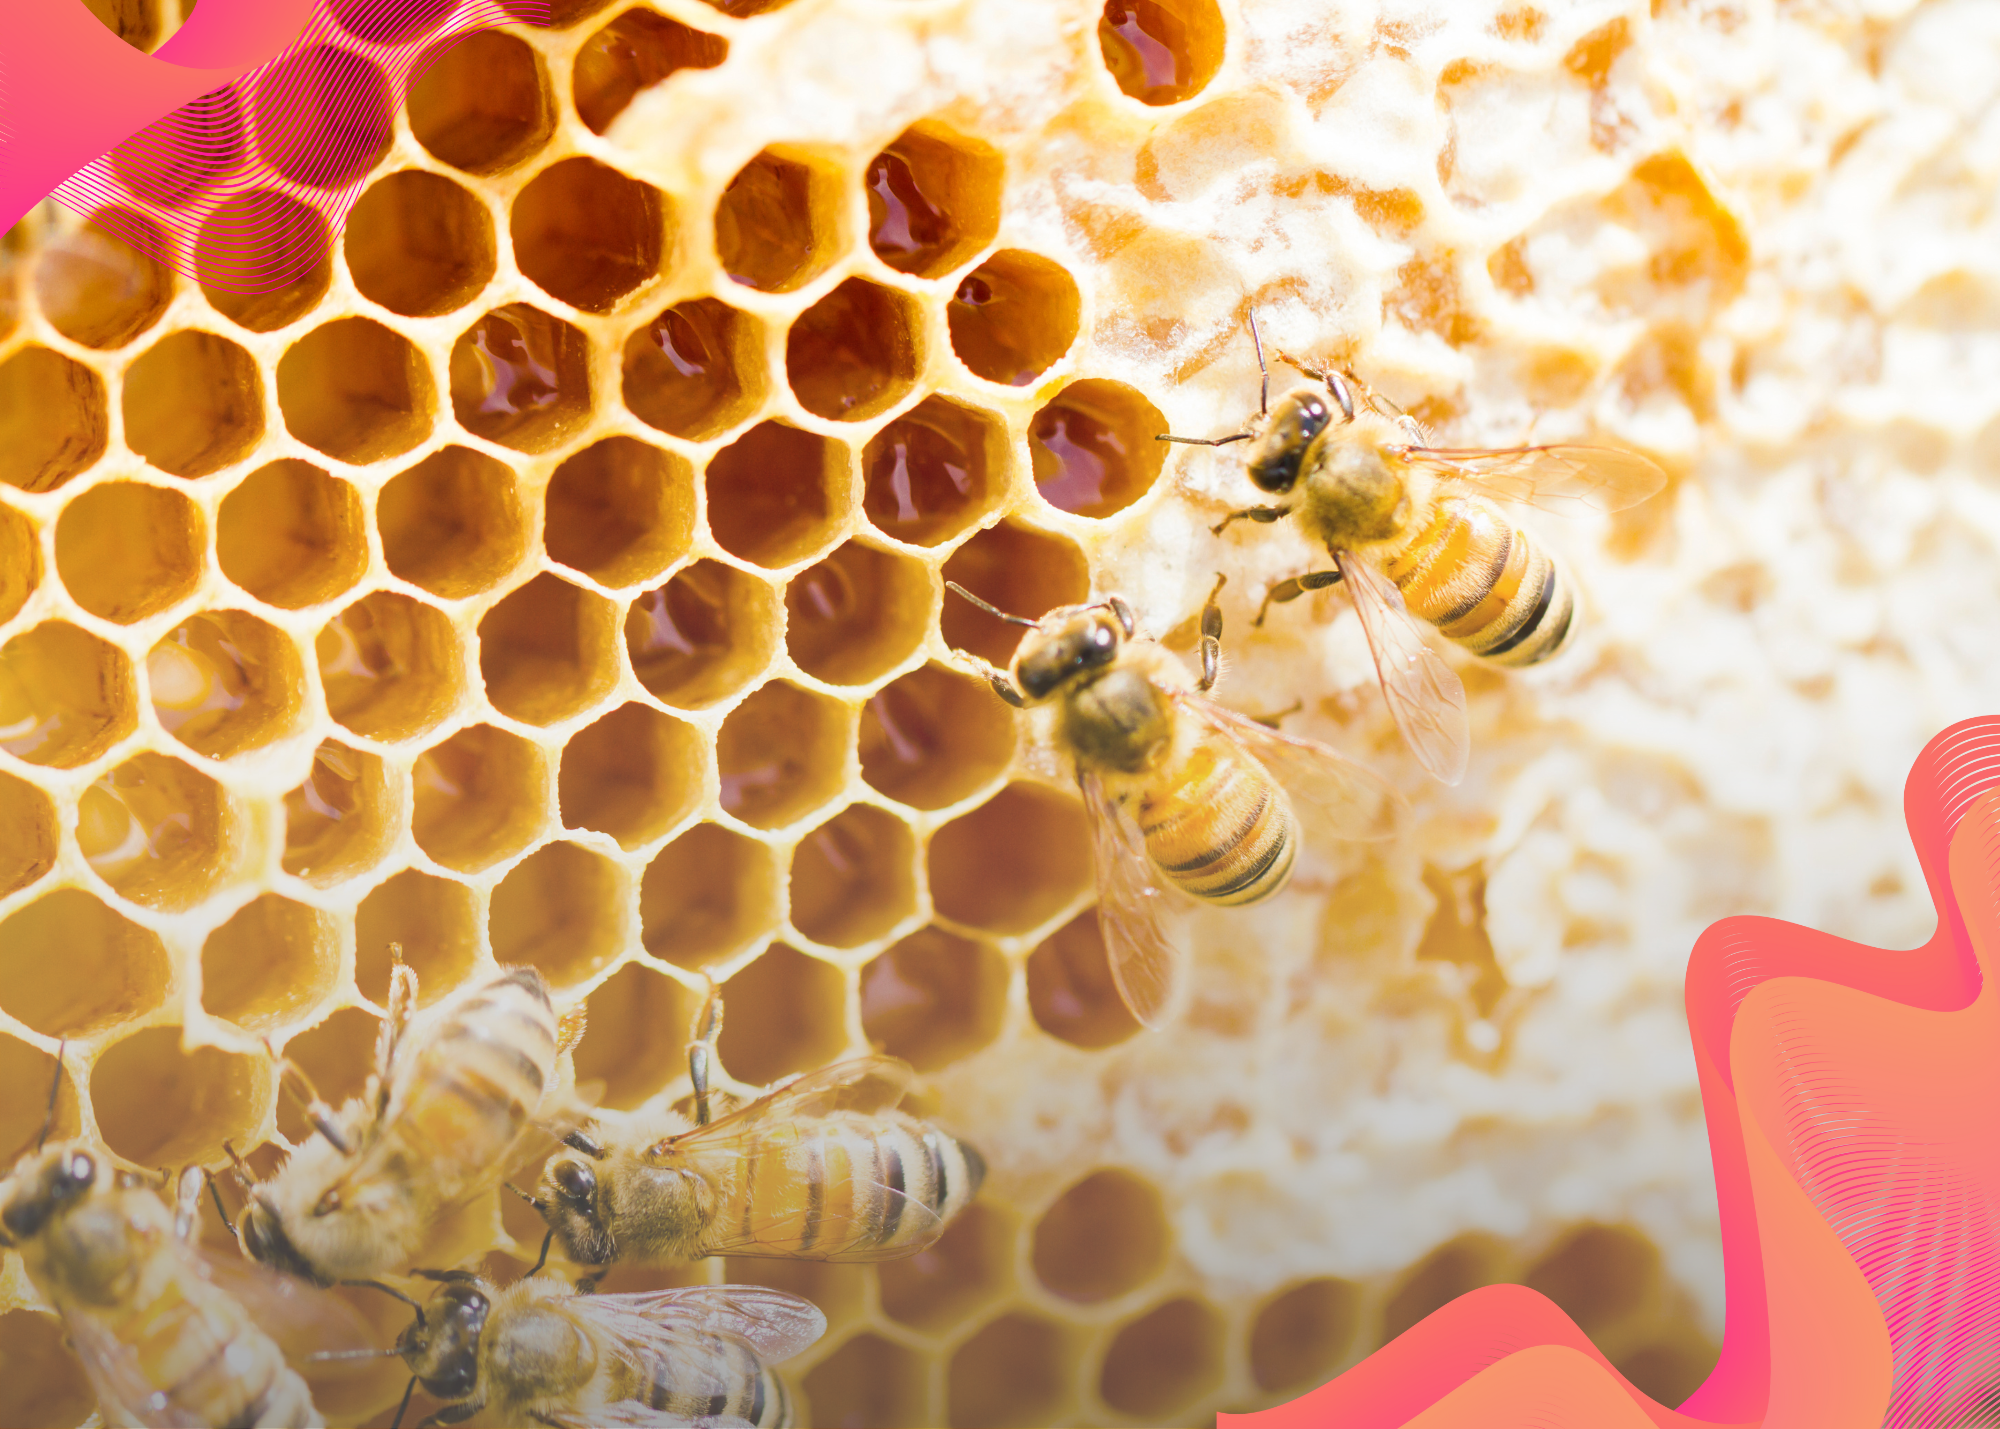 What Are the Benefits of Beeswax?